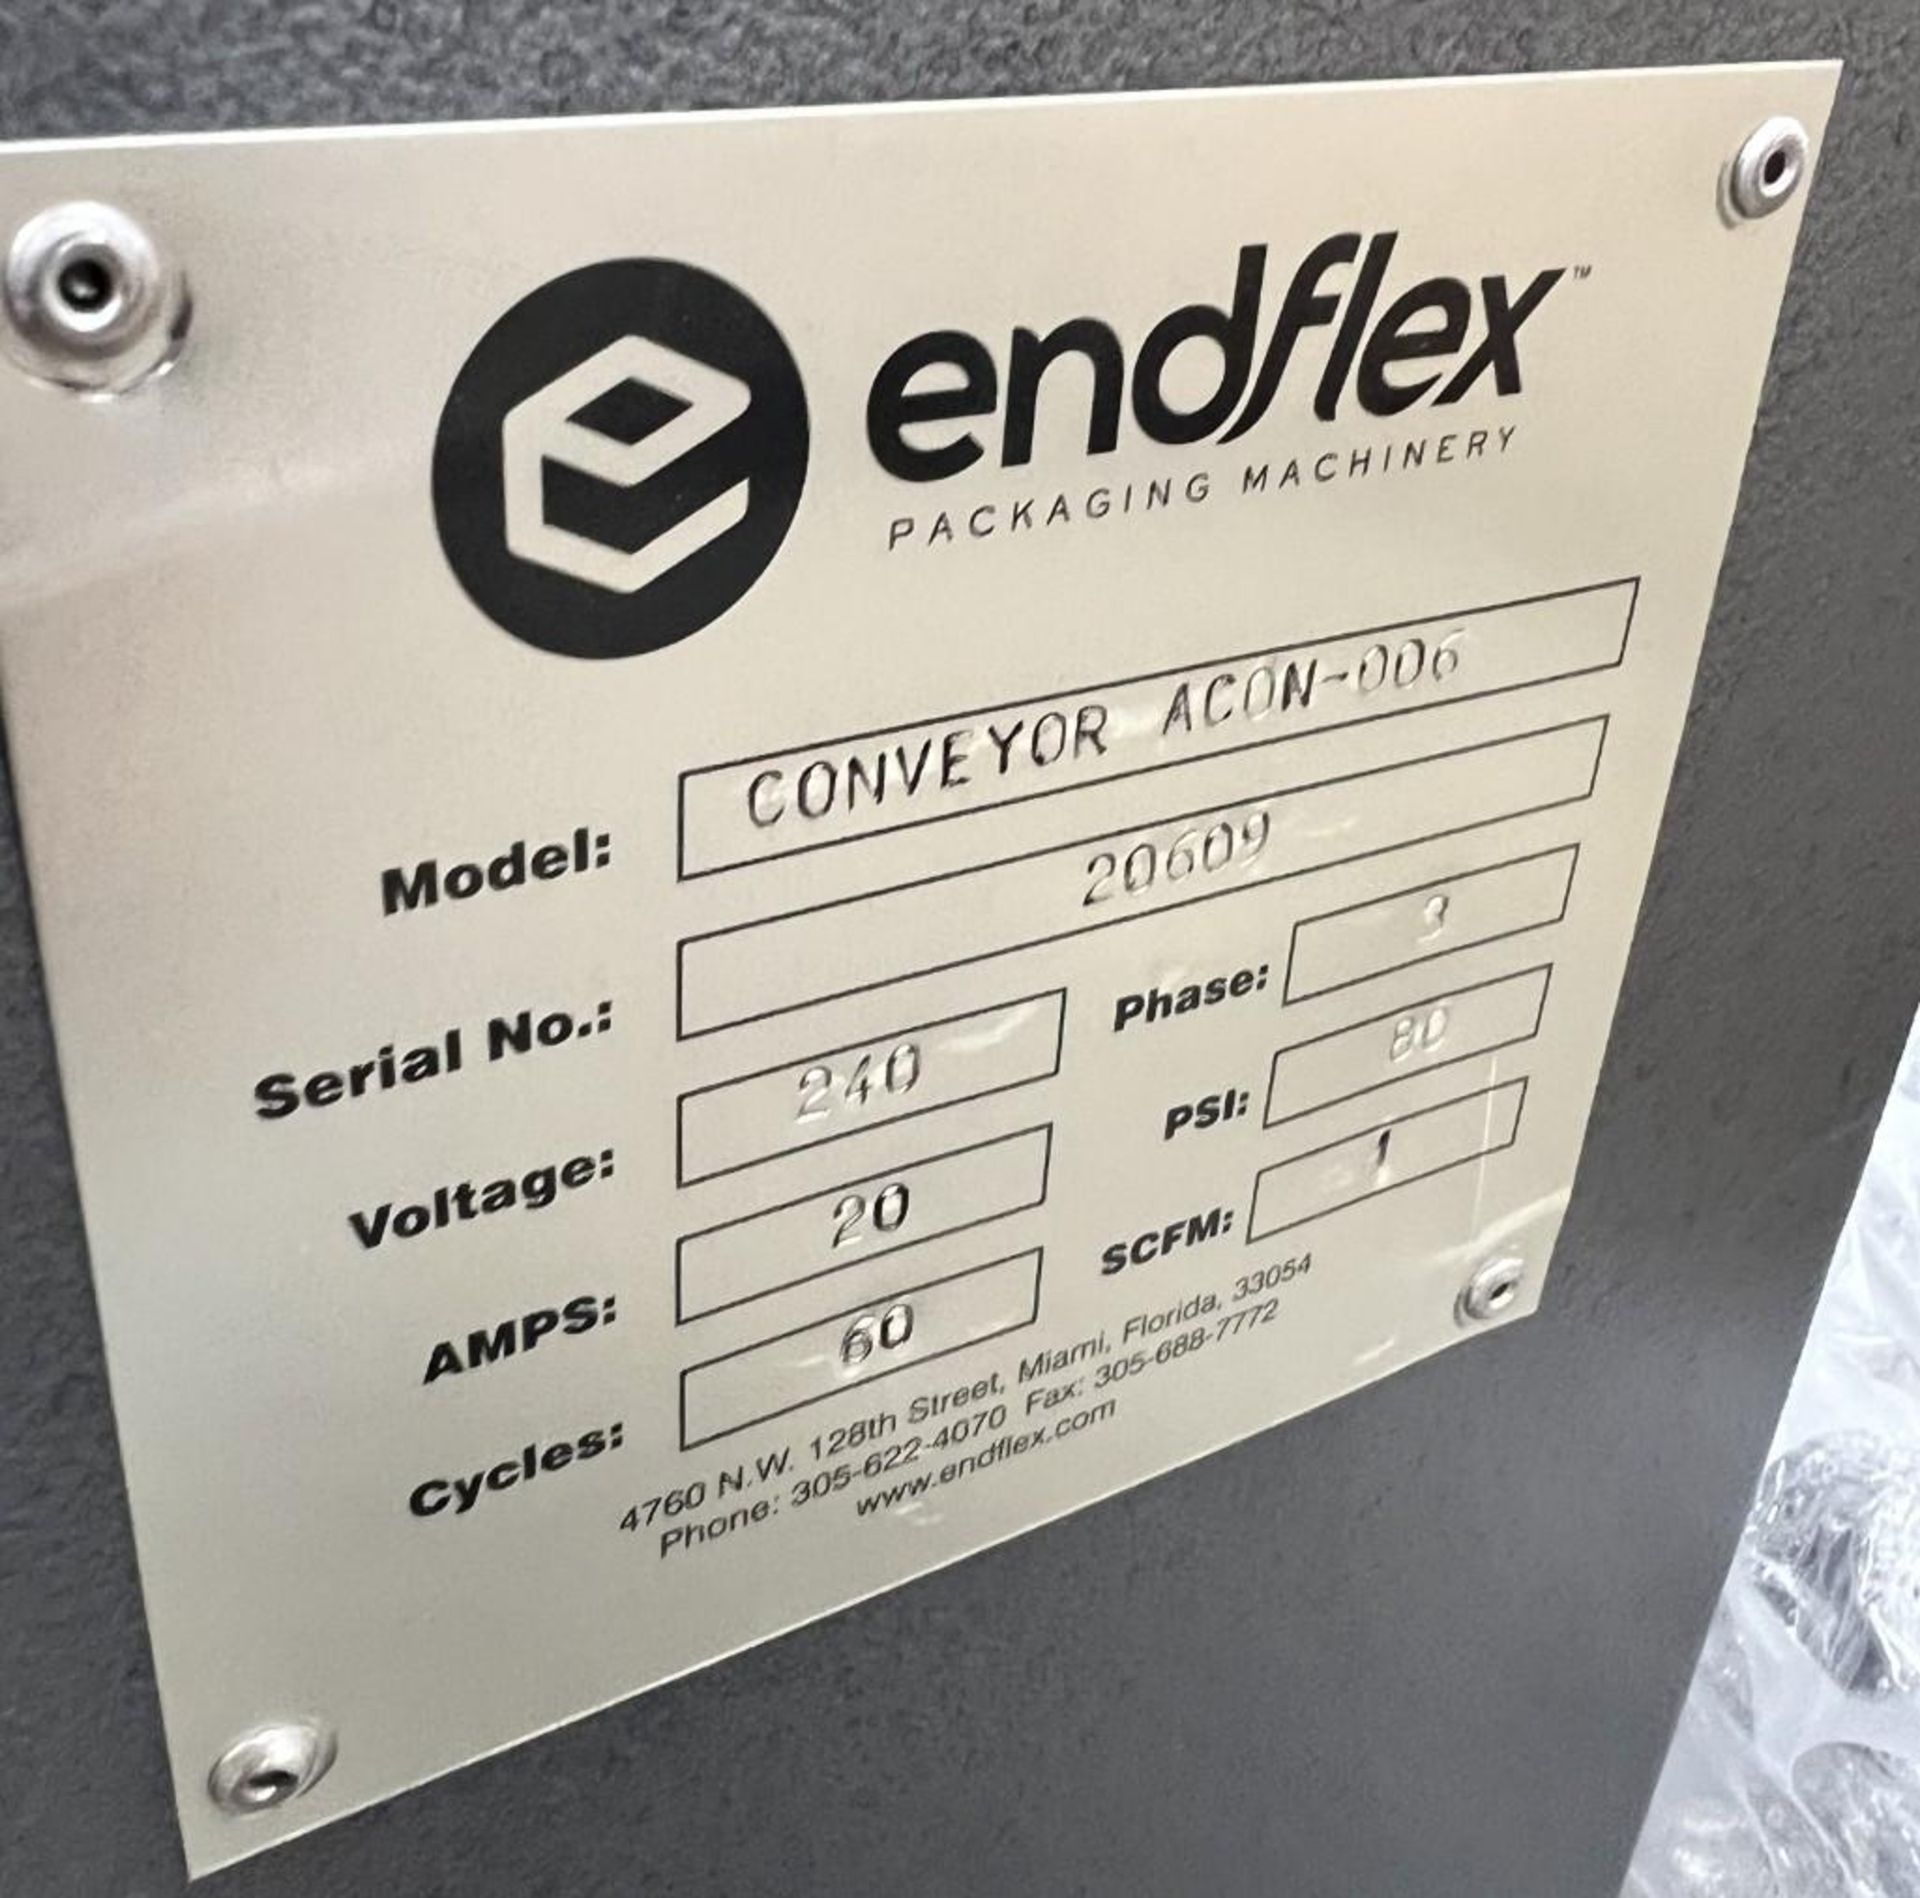 Endflex Packaging Machinery. Consisting Of (1) EndFlex Pick & Place, Model PPM-003, Serial# 20594. W - Image 42 of 57